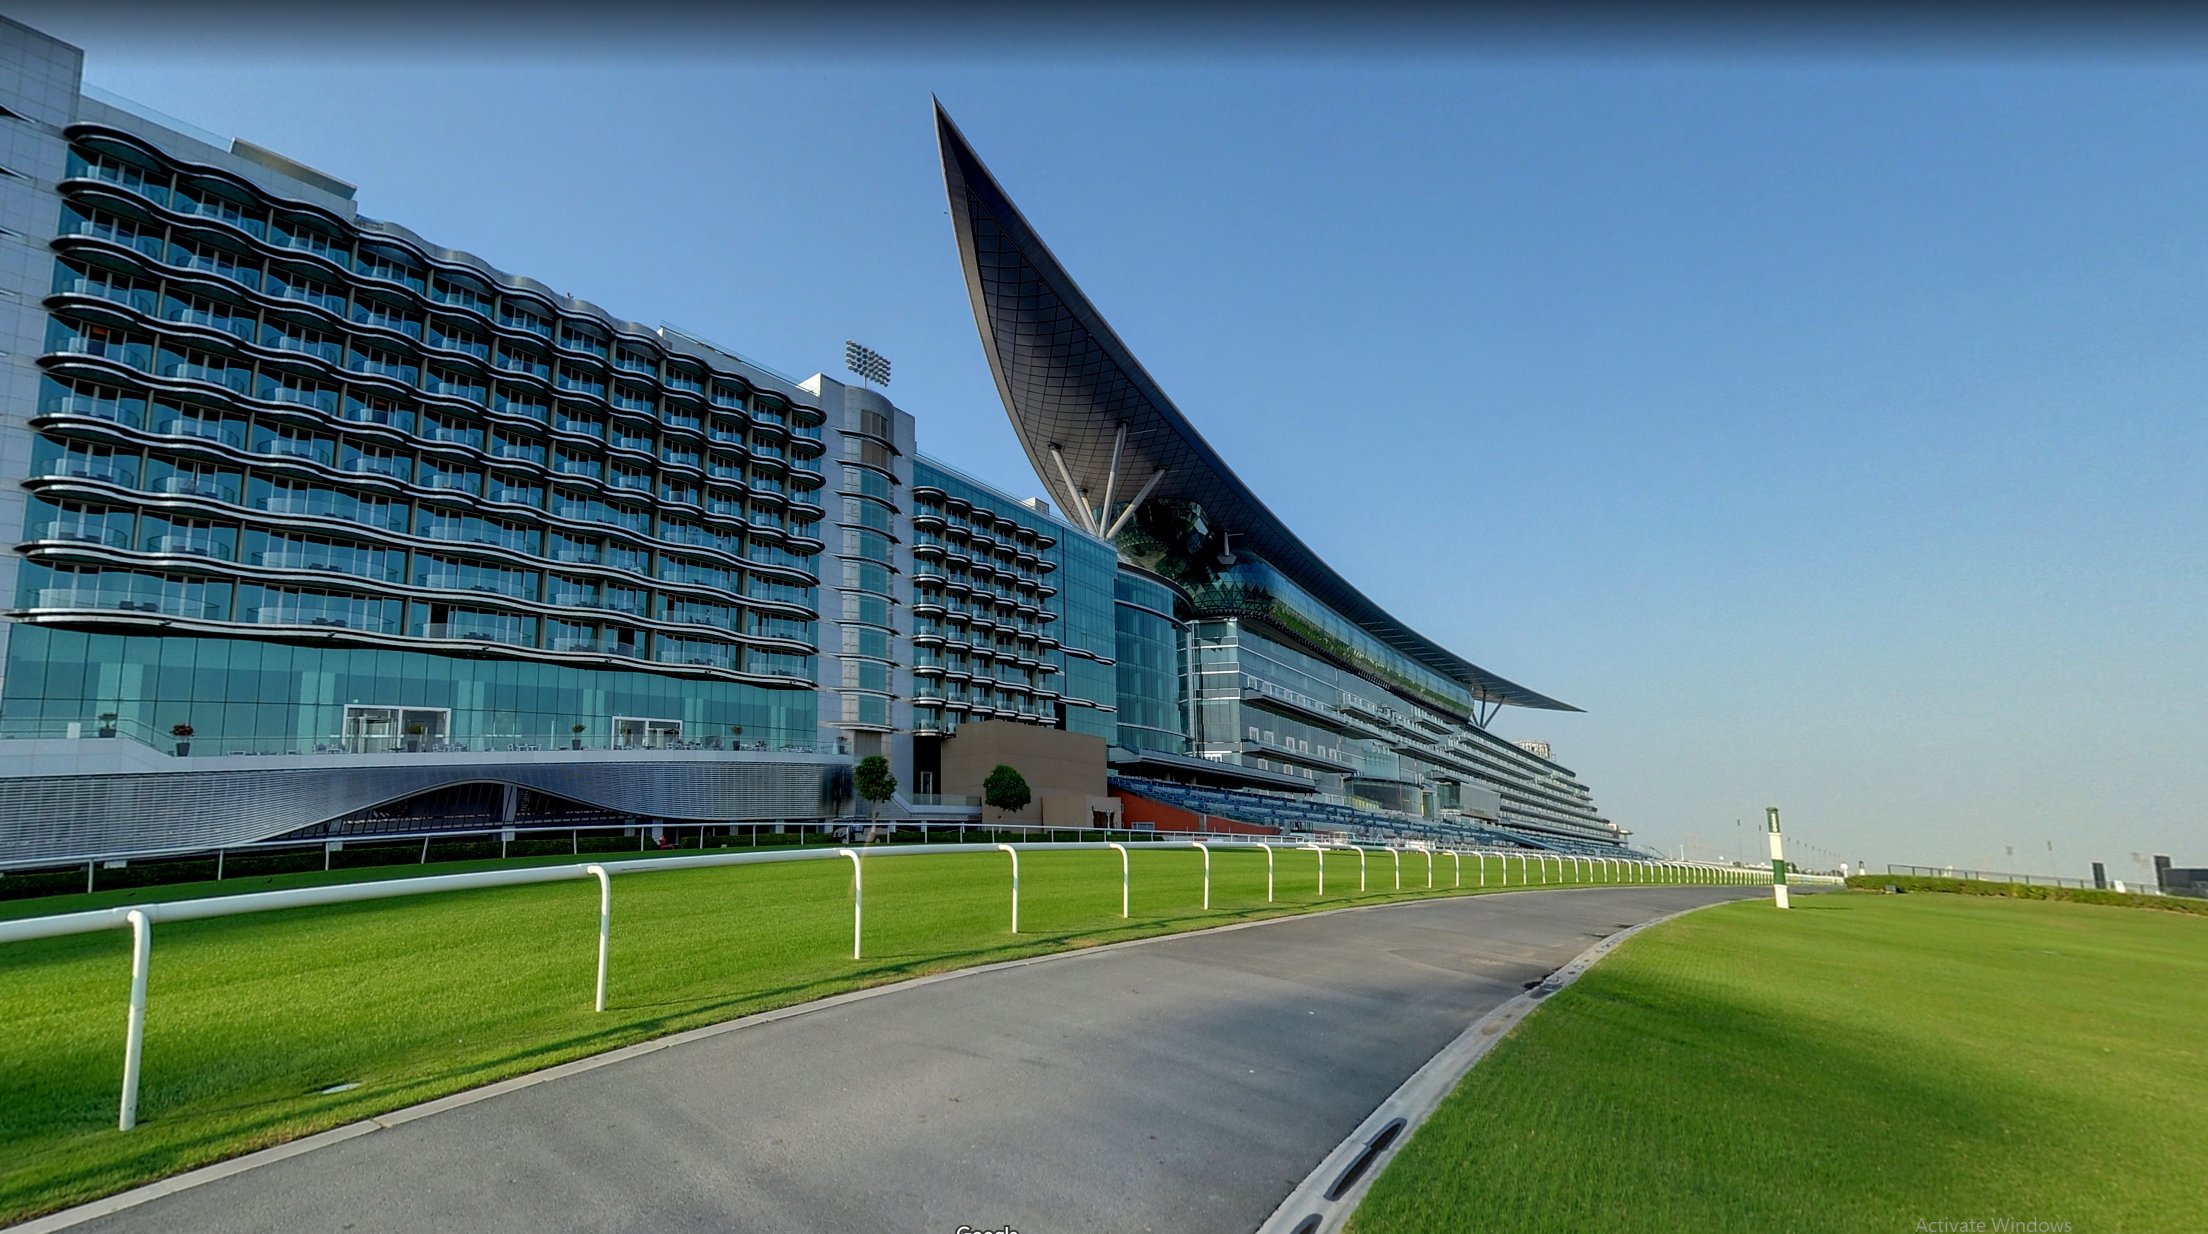 Gulf Racing Club offers two exciting Dubai prospects